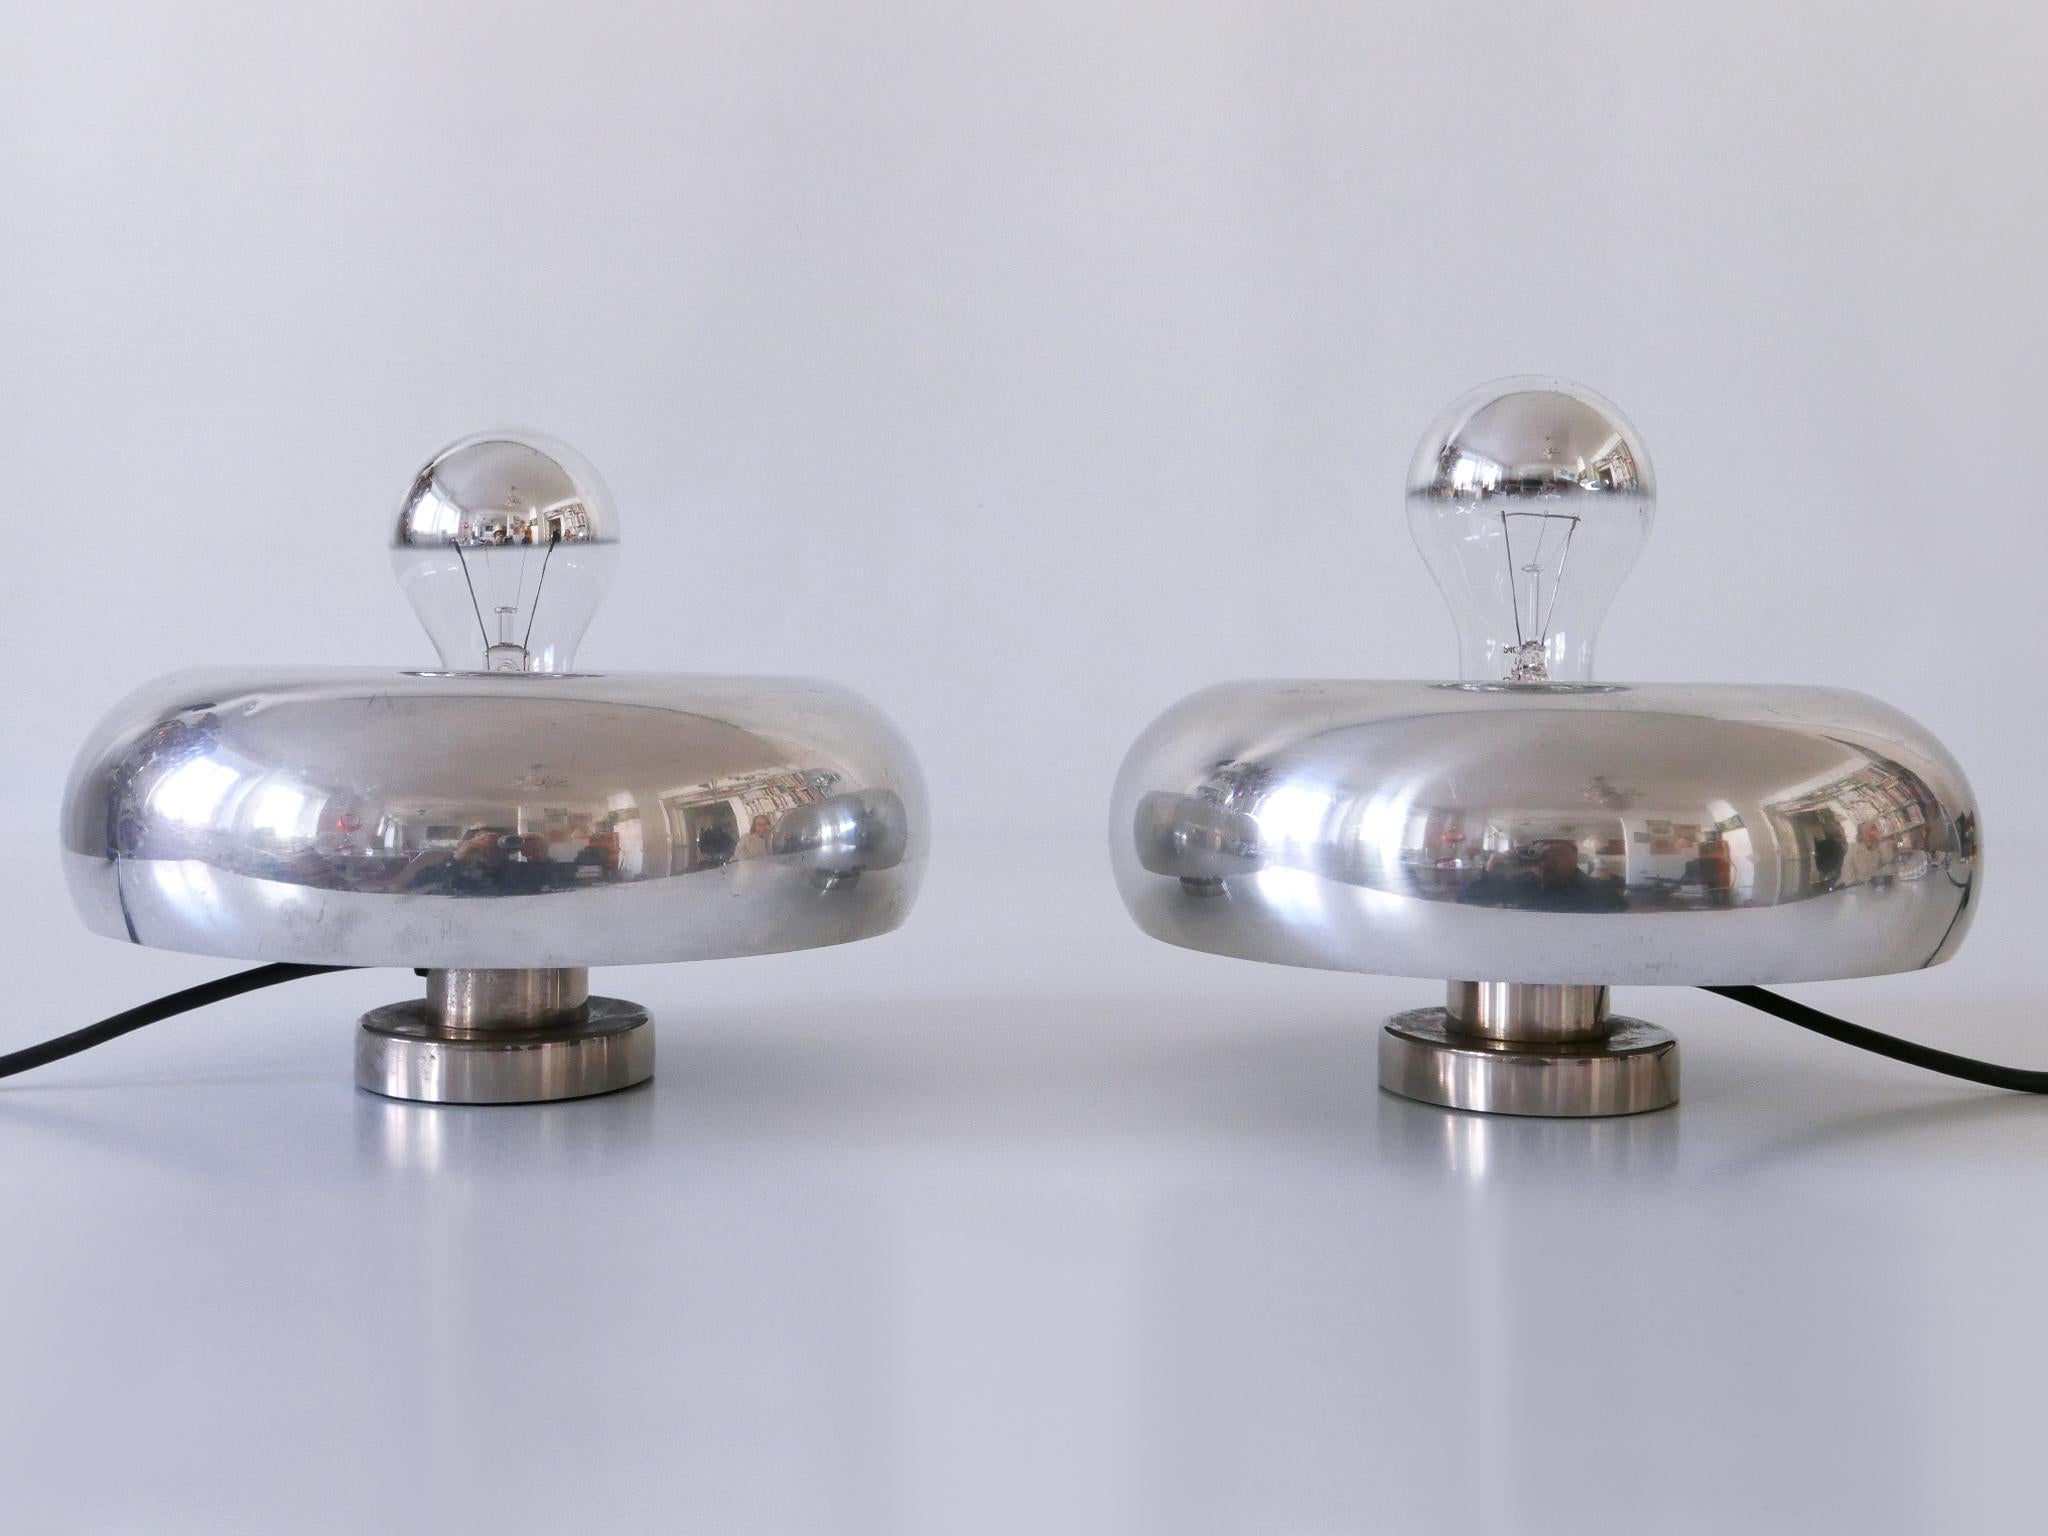 Metal Set of Two Table Lamps or Sconces Pox by Ingo Maurer for Design M Germany, 1960s For Sale